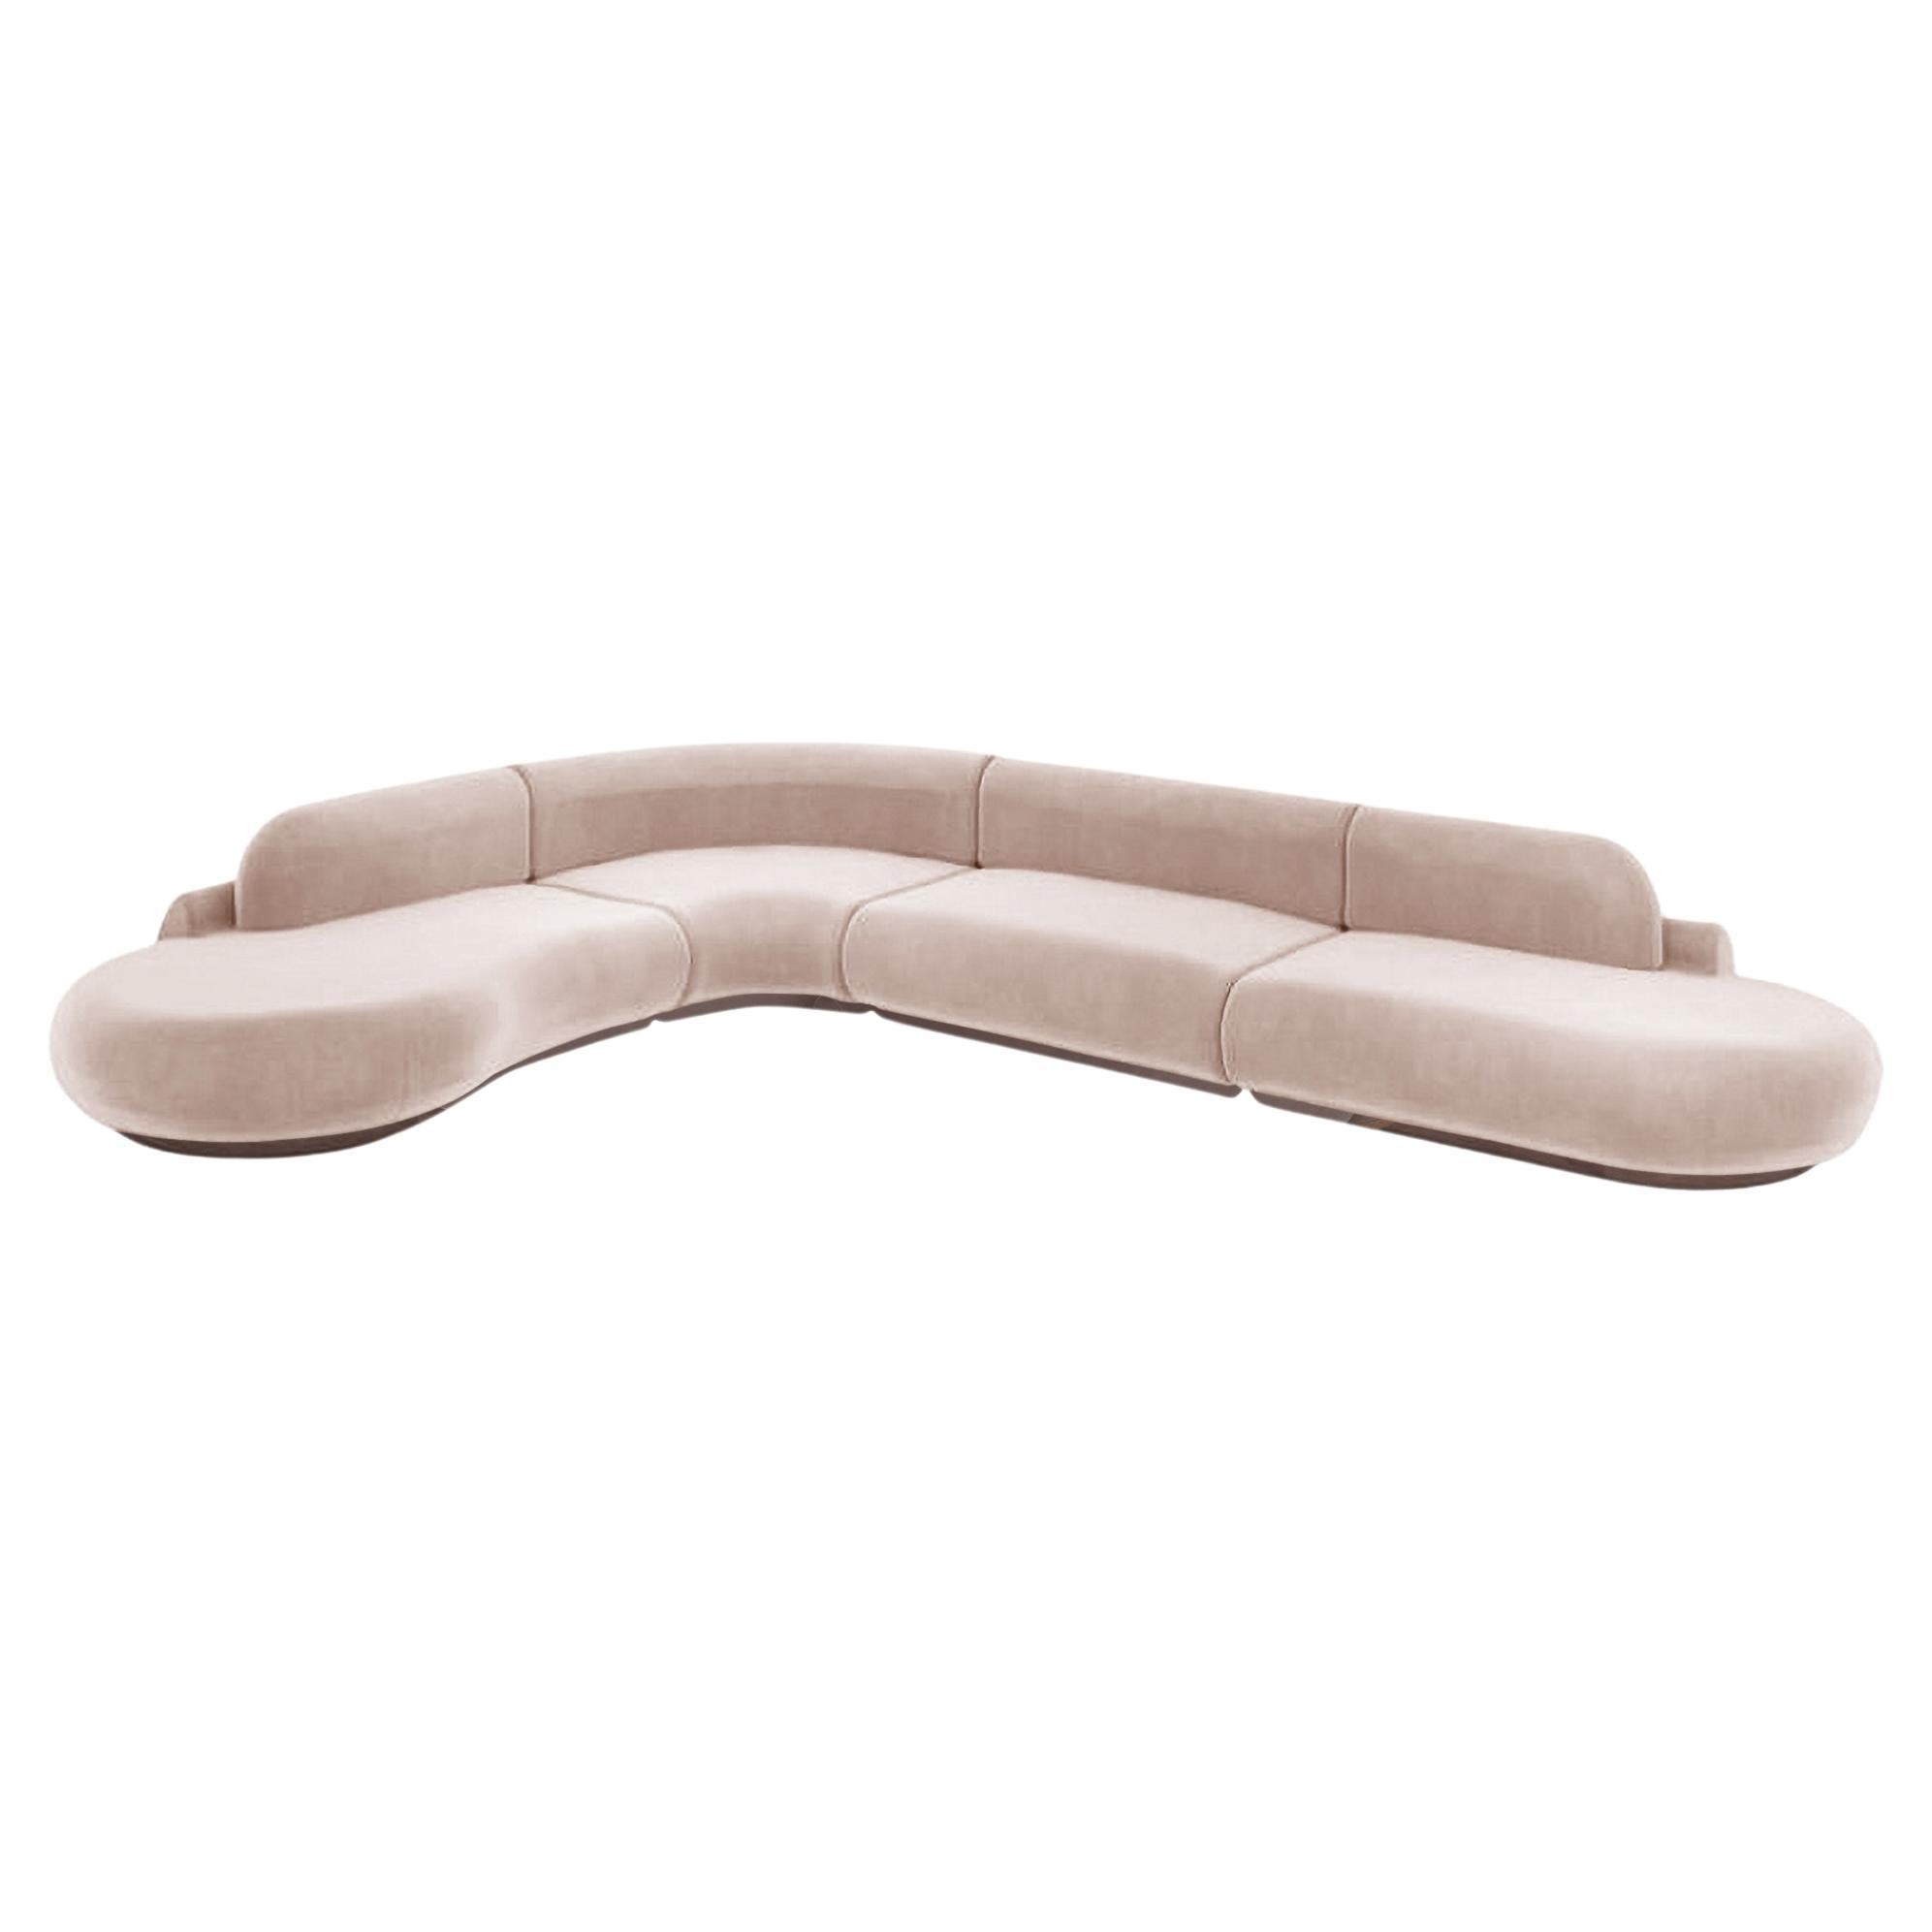 Naked Curved Sectional Sofa, 4 Piece with Beech Ash-056-1 and Vigo Blossom